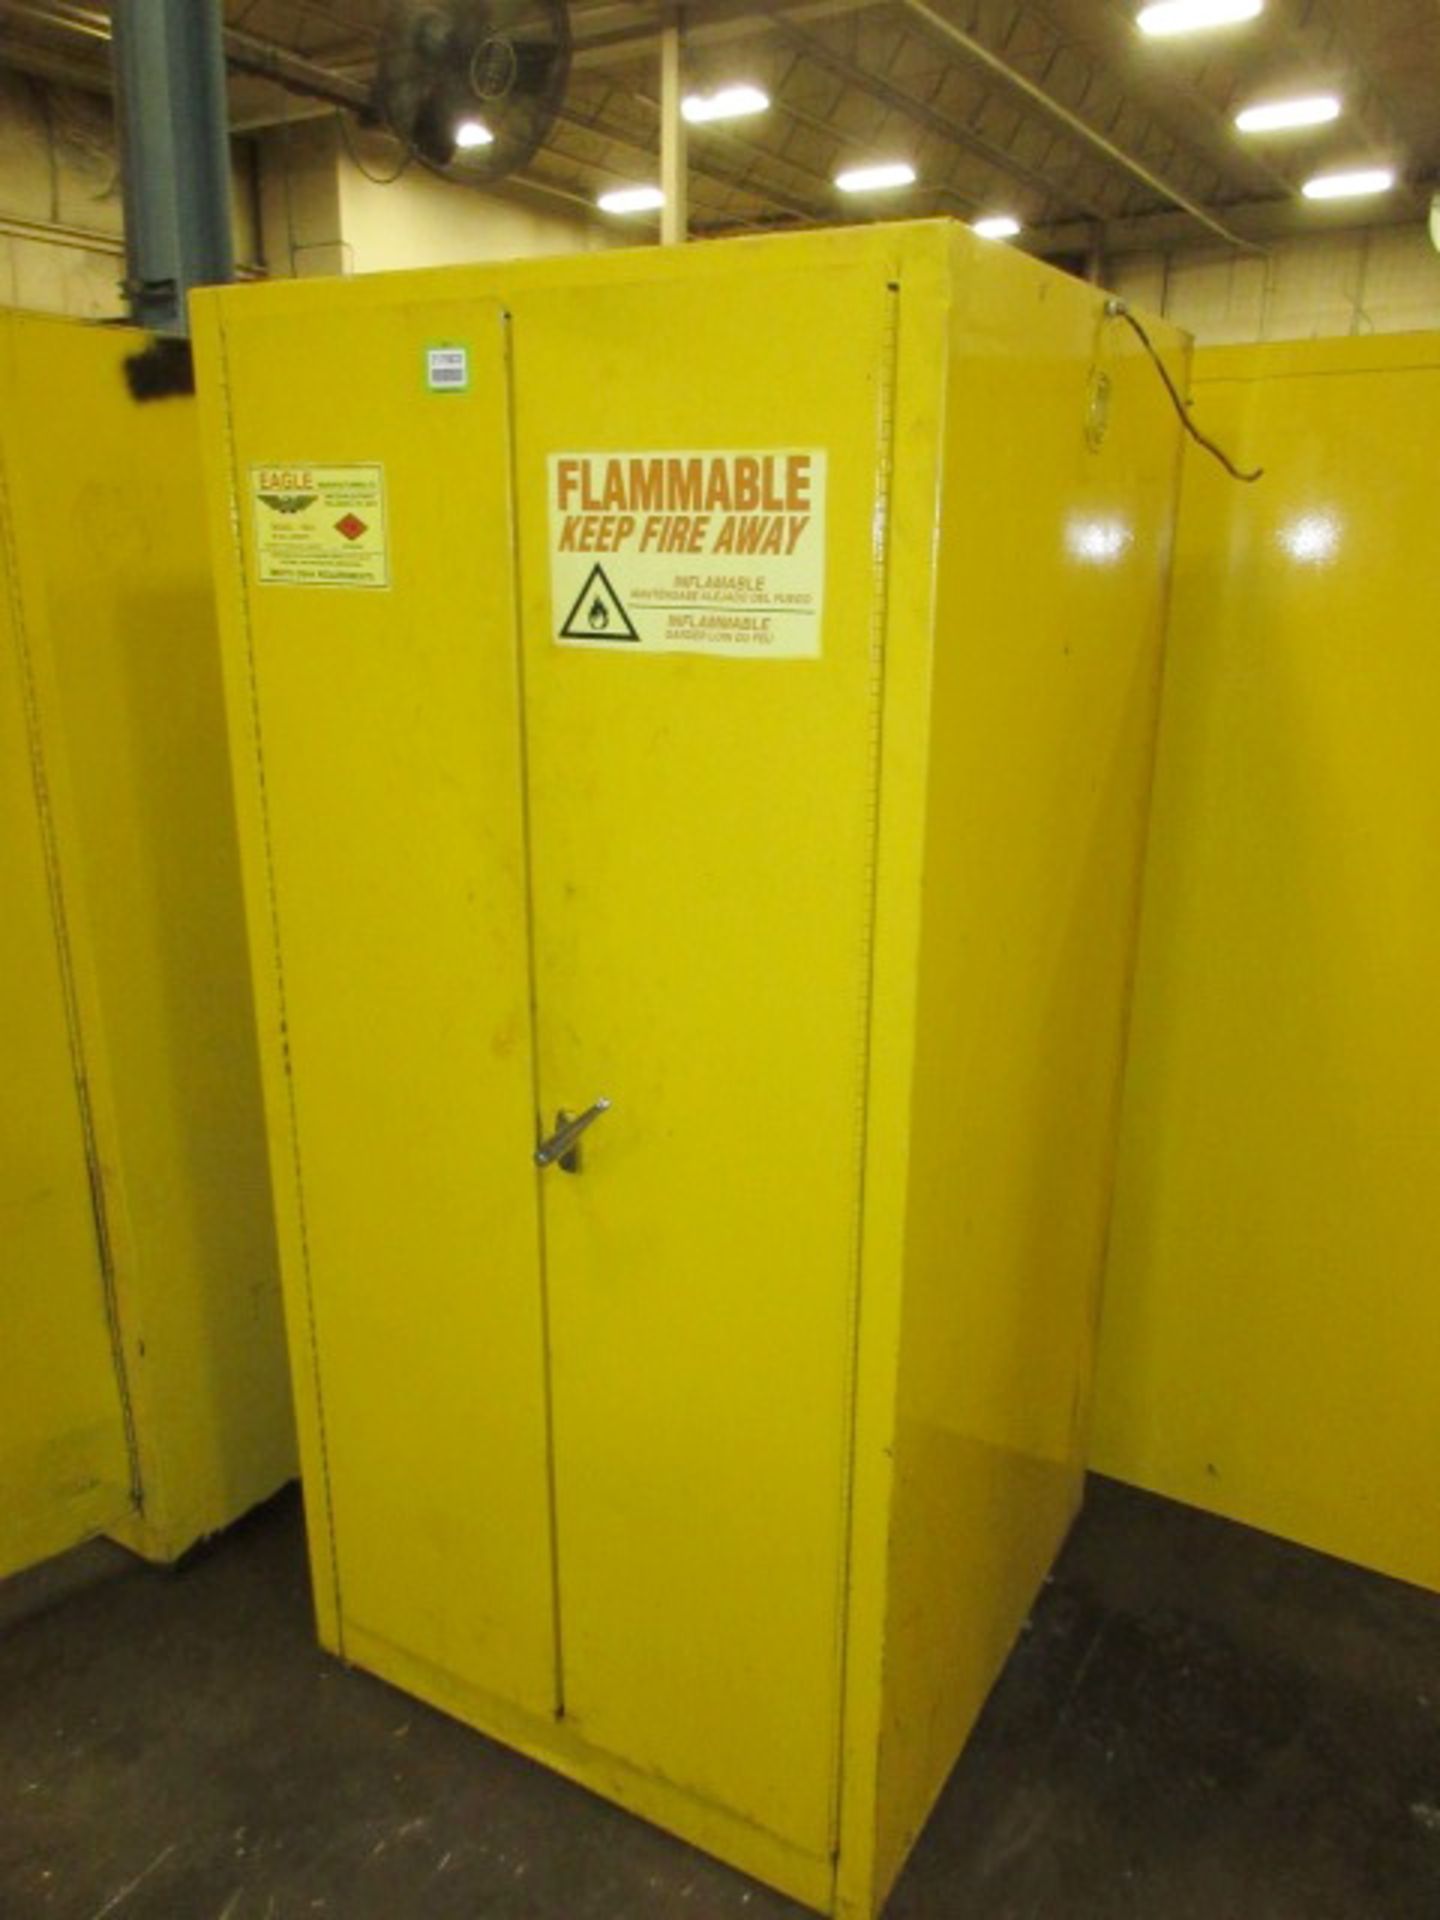 Flammable Cabinet. Eagle 1962 Flammable Liquid Storage Cabinet, 60-gallon capacity, 31.5"w x 31.5"